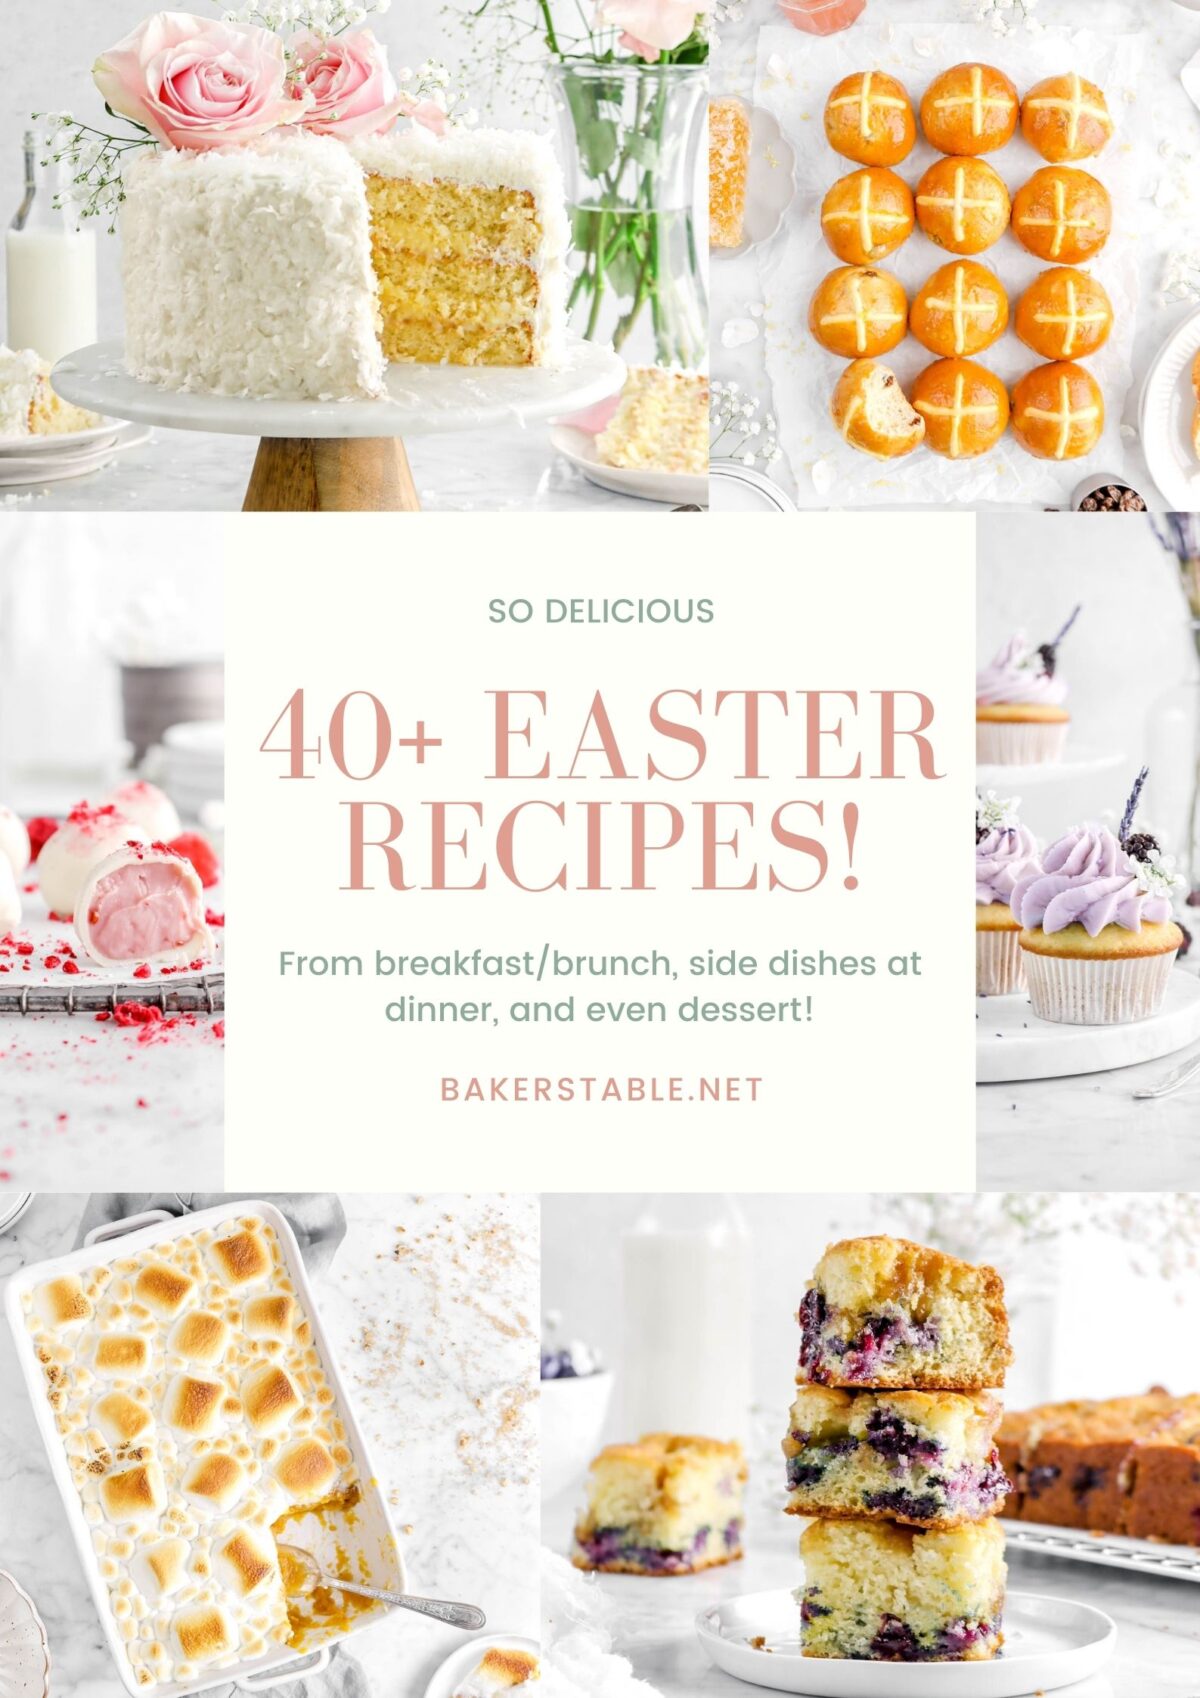 40+ easter recipes image collage with photos of coconut cake, hot cross buns, raspberry truffles, cupcakes, sweet potato casserole, and stacked slices of blueberry cake